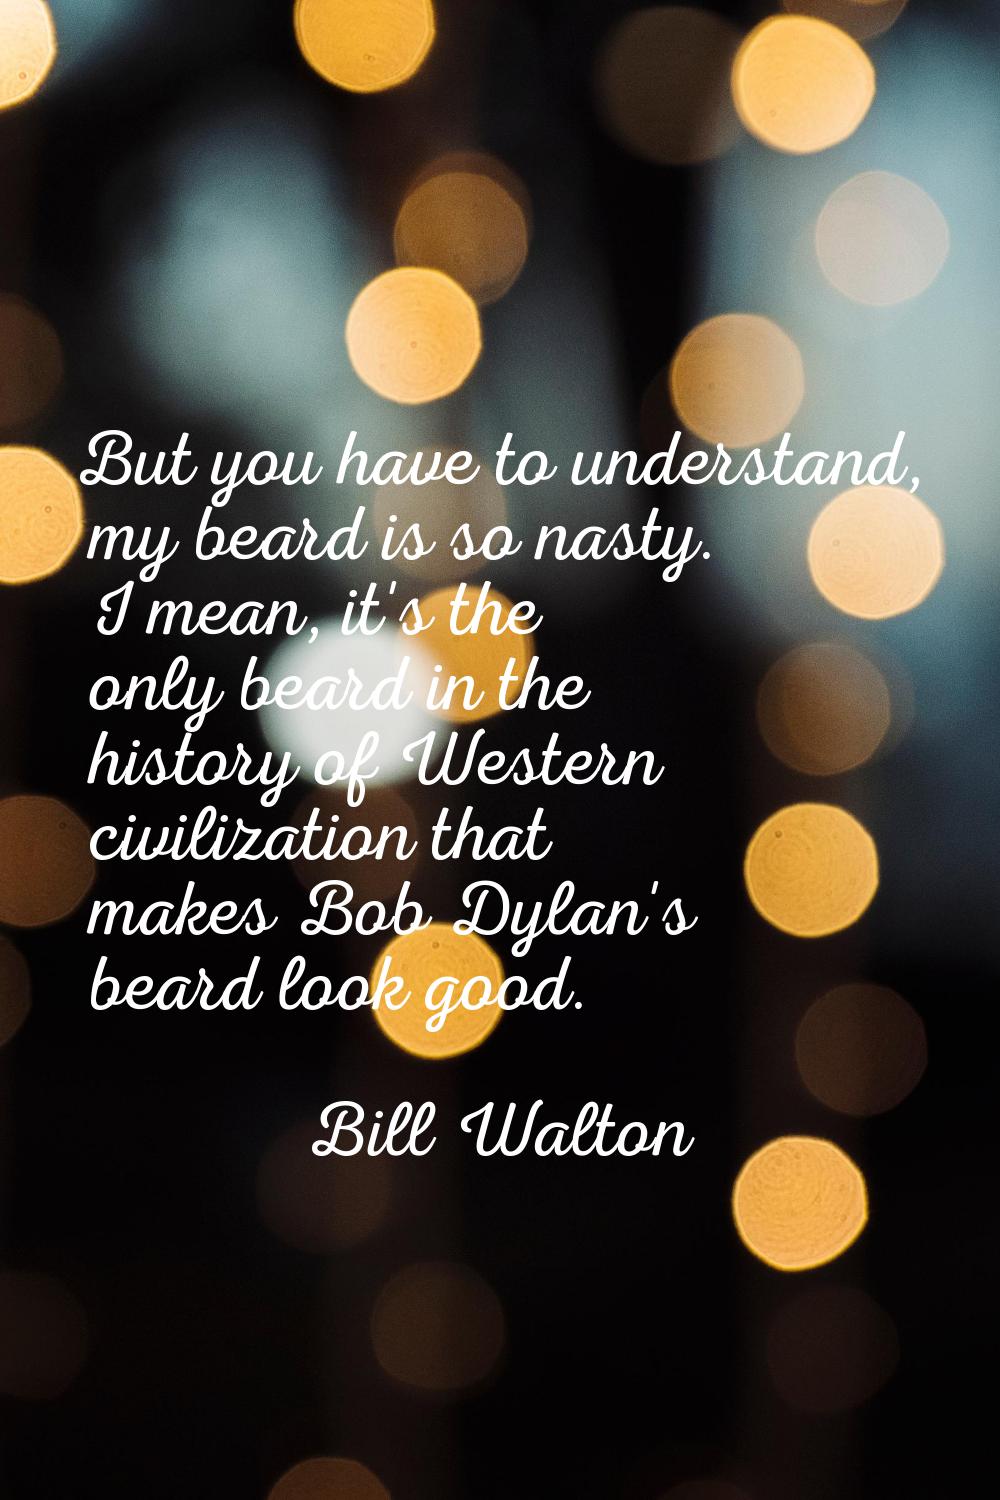 But you have to understand, my beard is so nasty. I mean, it's the only beard in the history of Wes